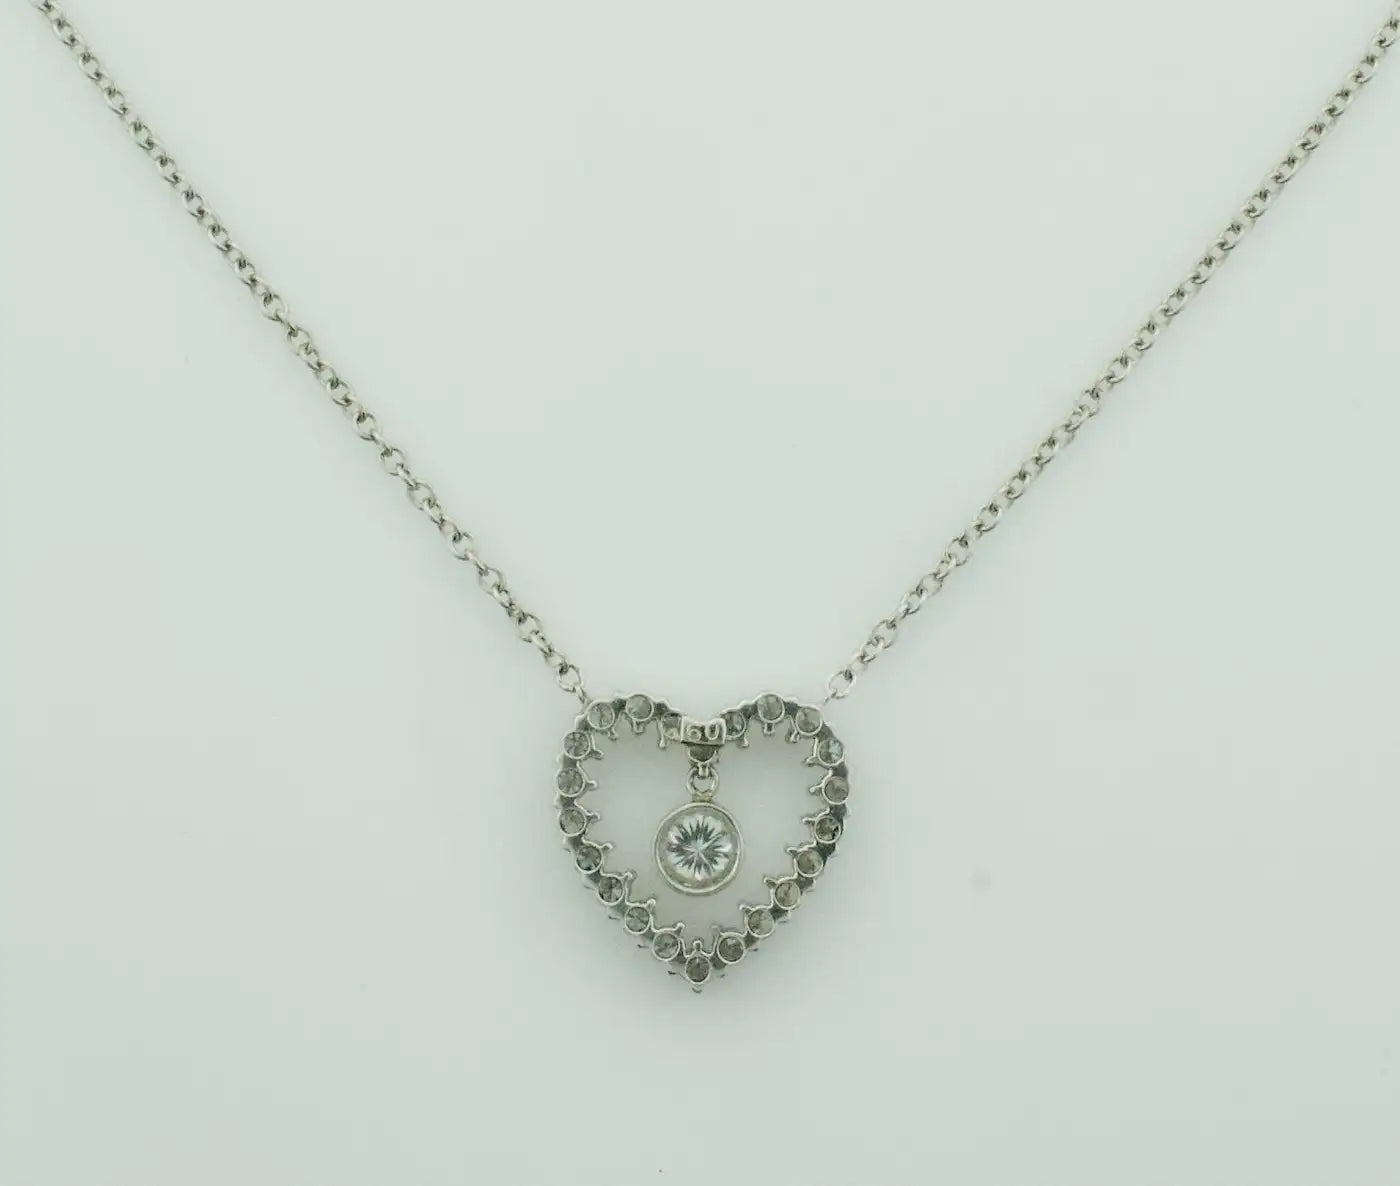 Platinum and Diamond Heart Necklace 1.05 Carats Total Weight